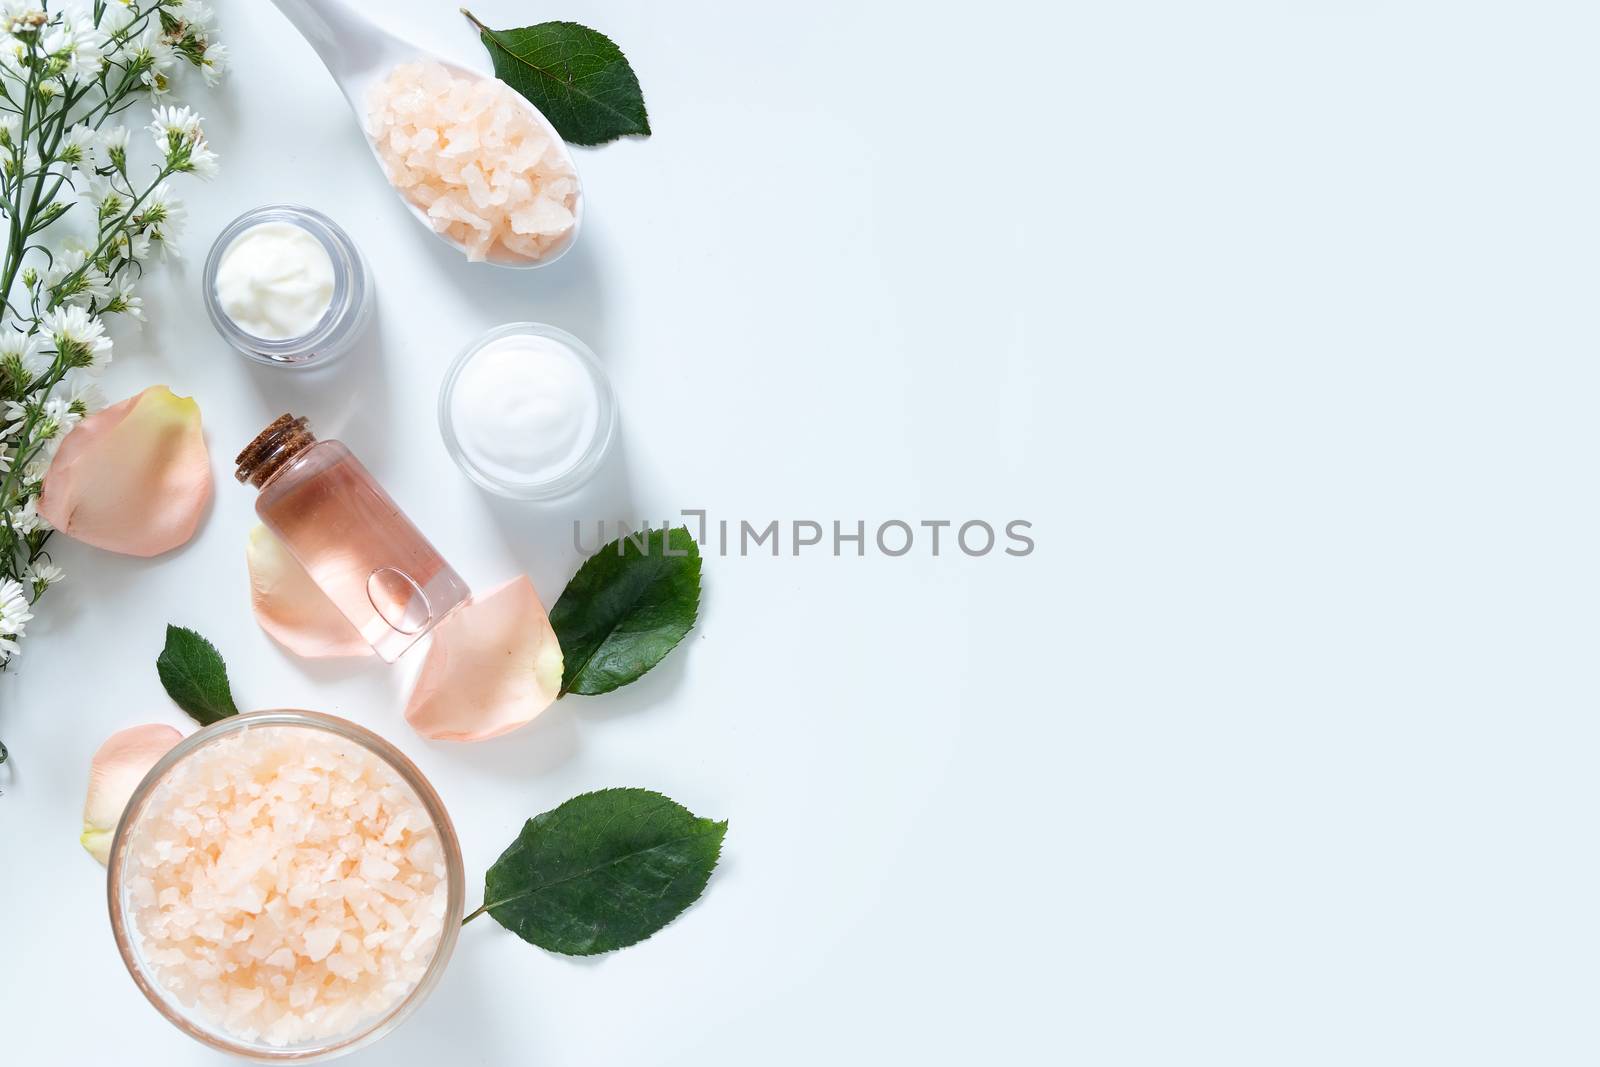 skin care concept. flat lays of skincare remedies style in package with blank label with natural materials isolated on white background with copy space